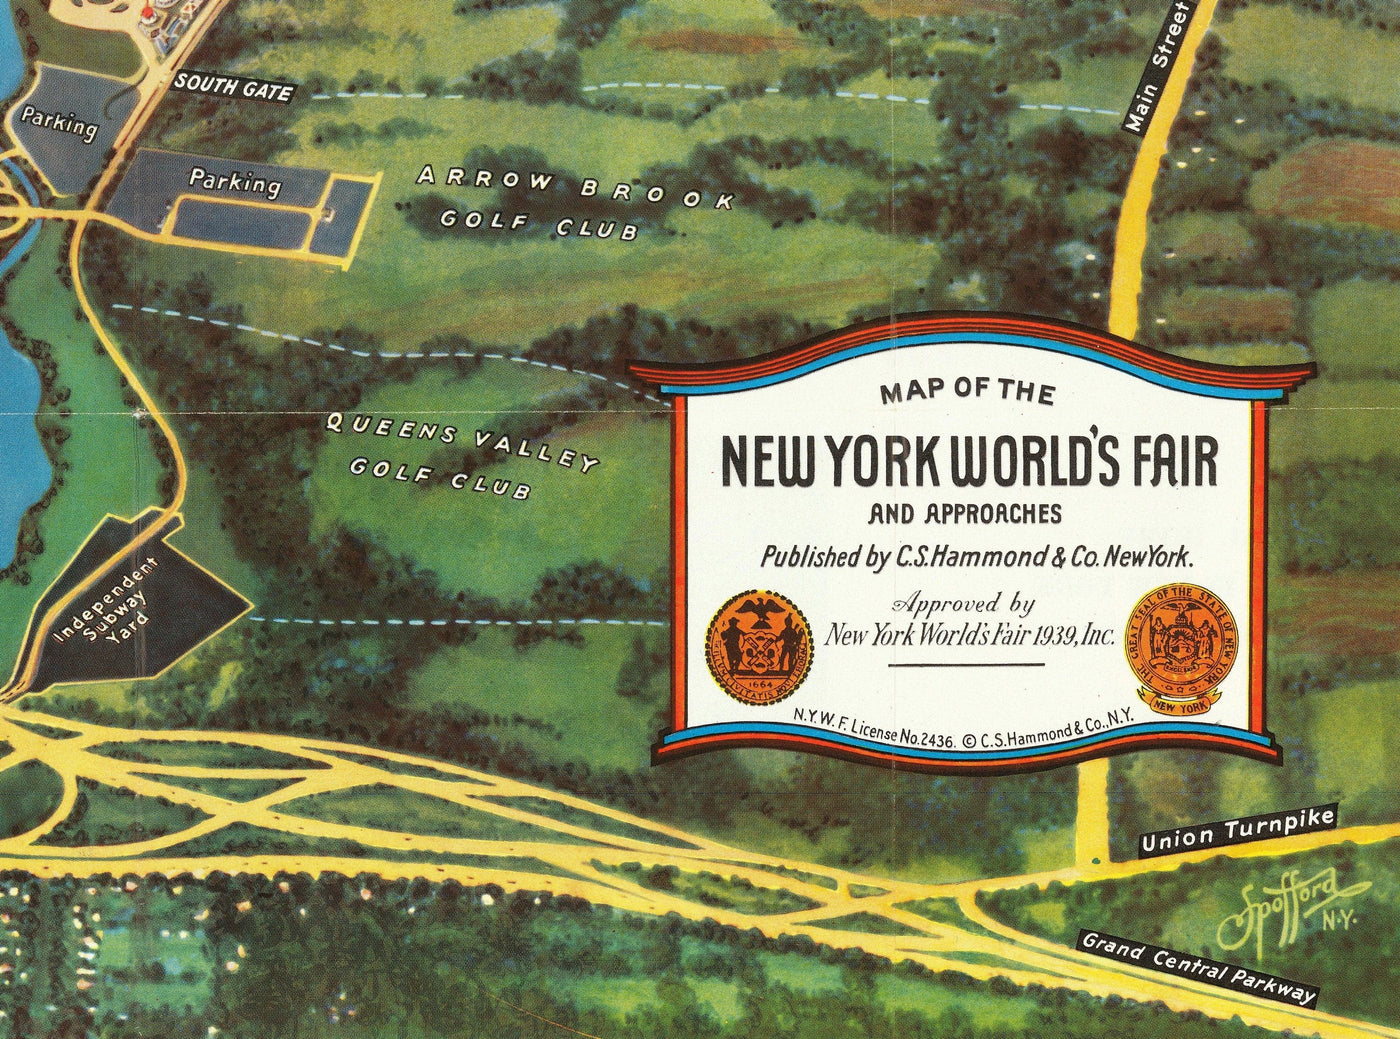 New York World's Fair, 1939 by Spofford - Old Pictorial Map of Manhattan, New Jersey, Subway, Railway, Flushing Meadows